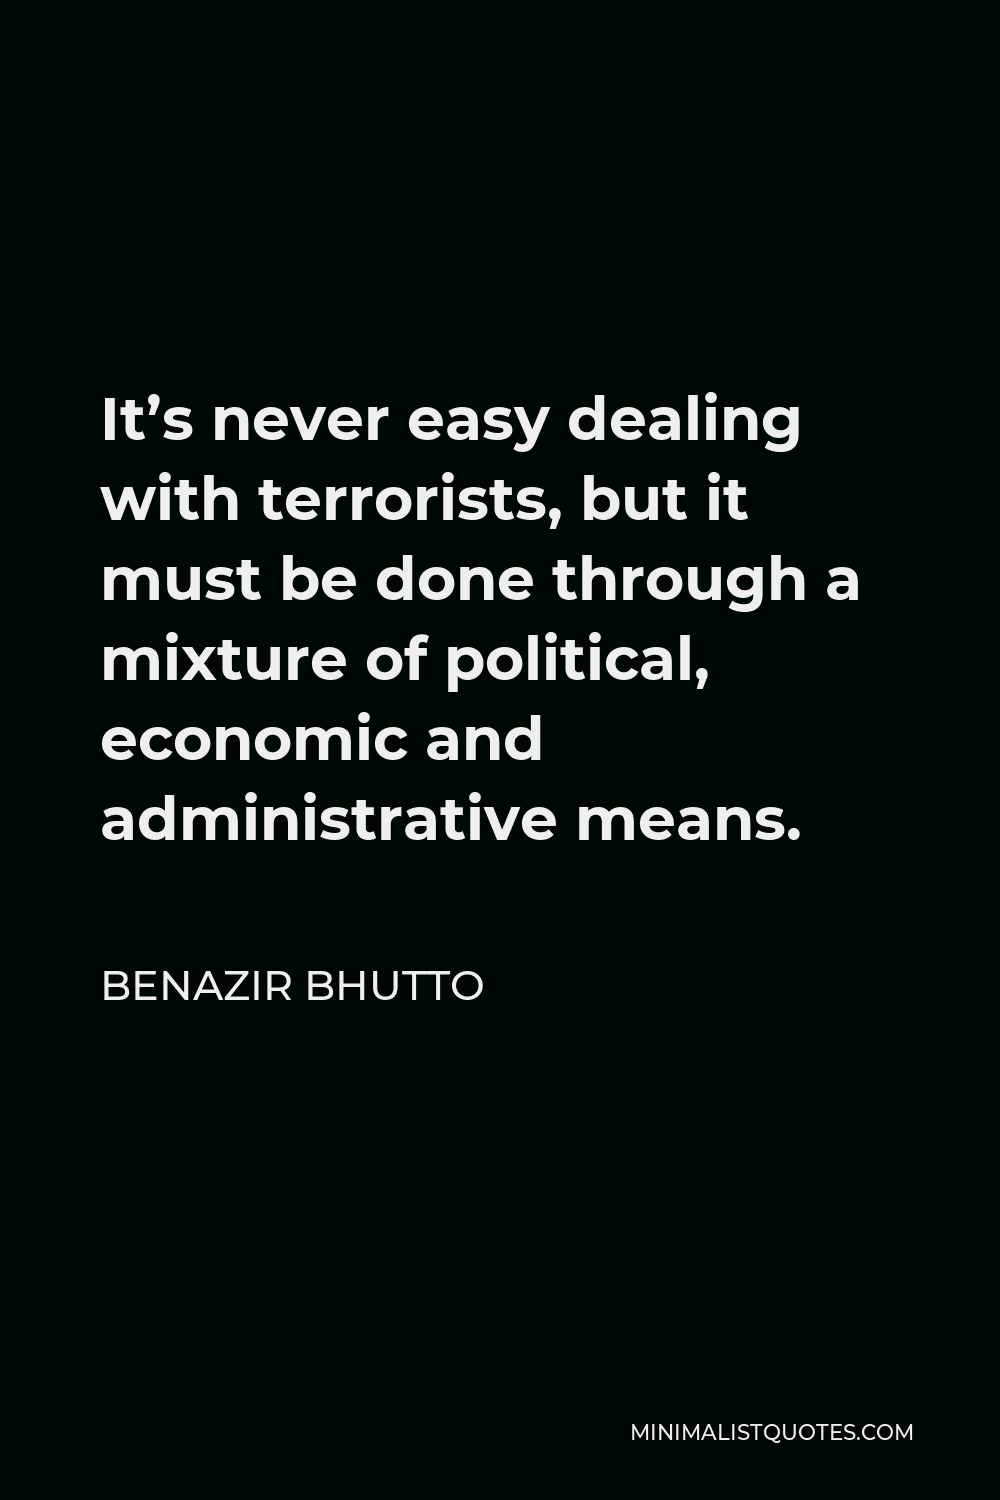 Benazir Bhutto Quote - It’s never easy dealing with terrorists, but it must be done through a mixture of political, economic and administrative means.